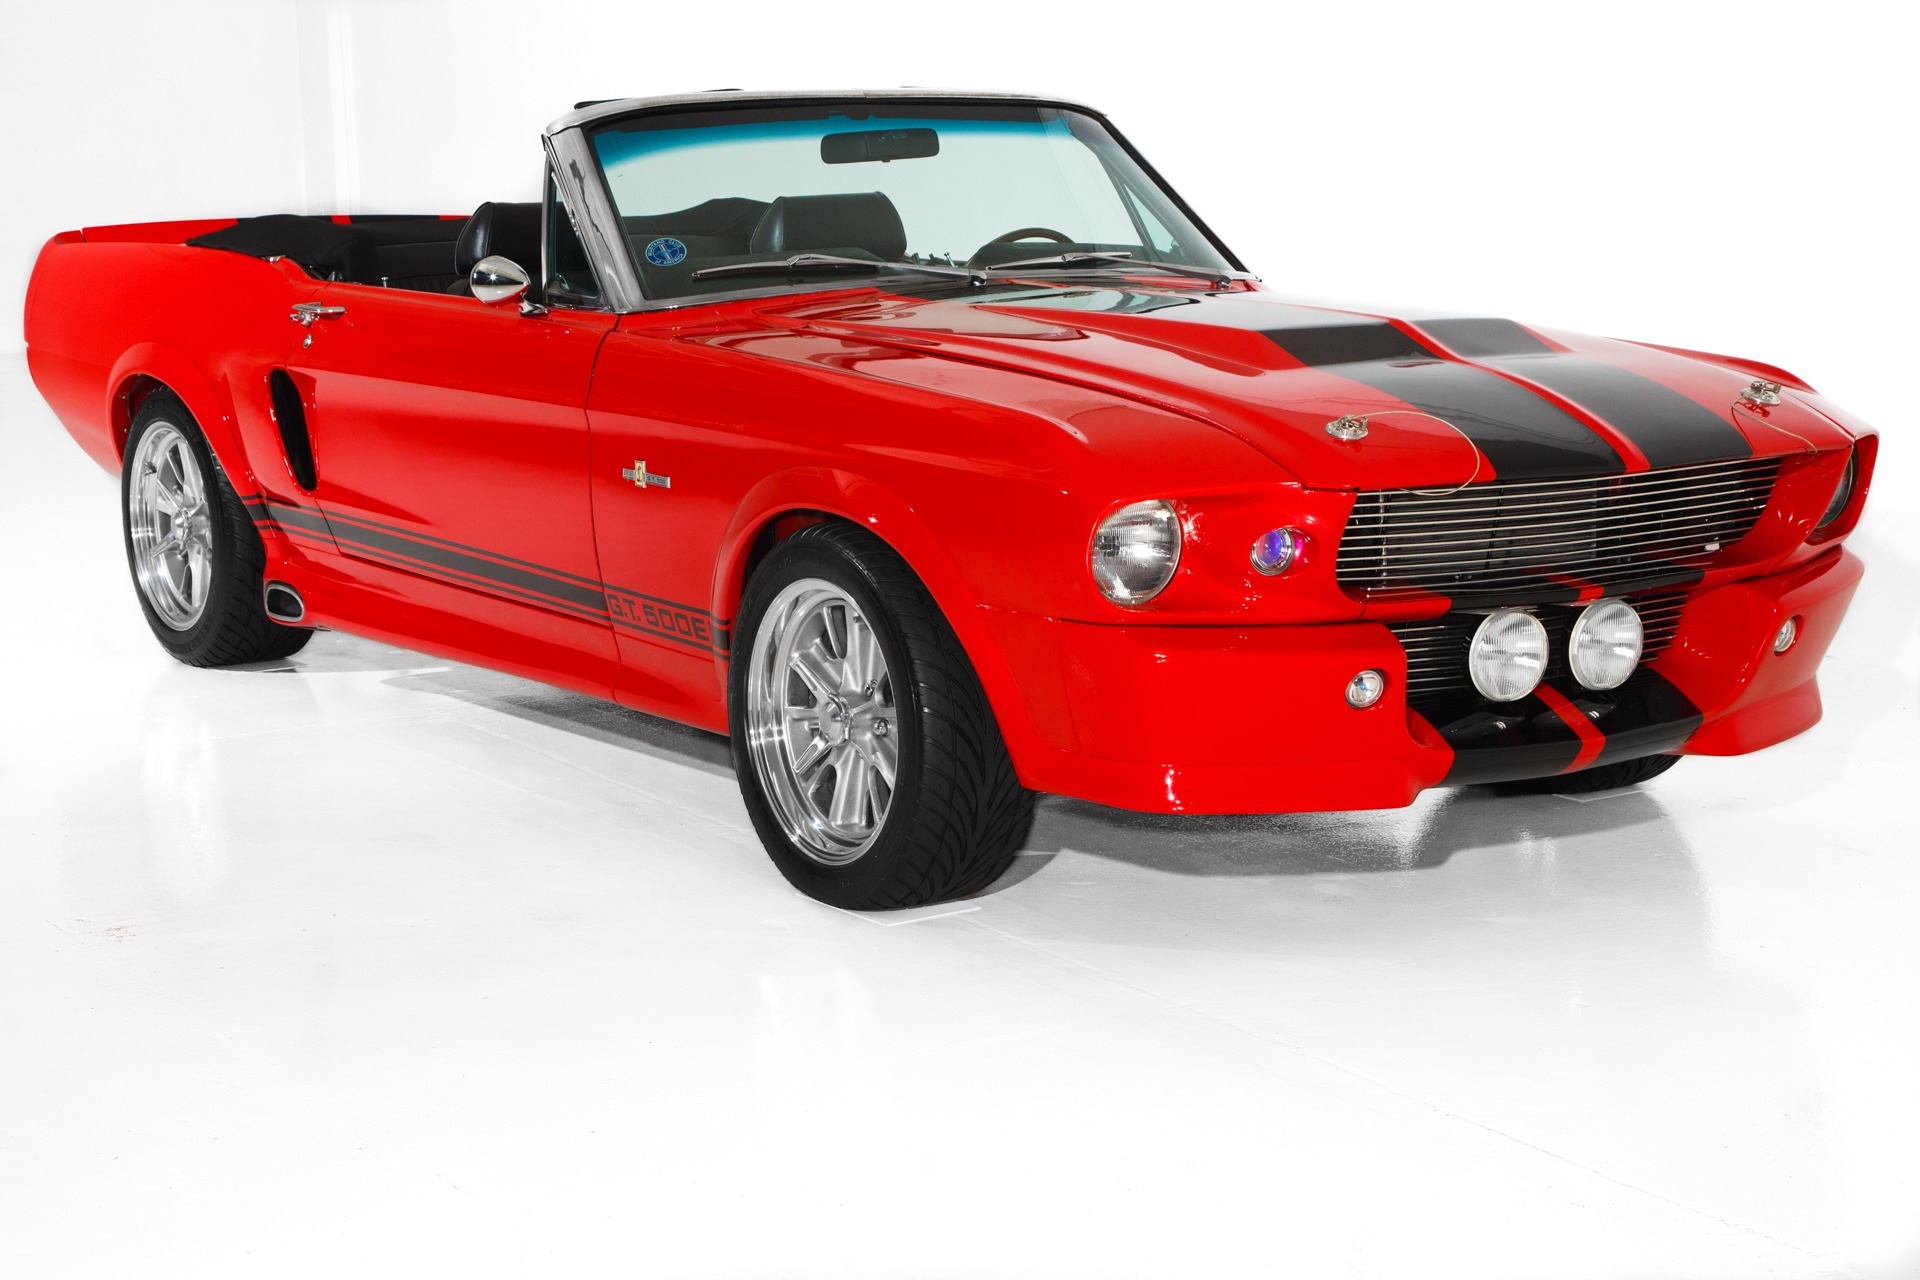 For Sale Used 1968 Ford Mustang Red/Black Eleanor 5-speed | American Dream Machines Des Moines IA 50309